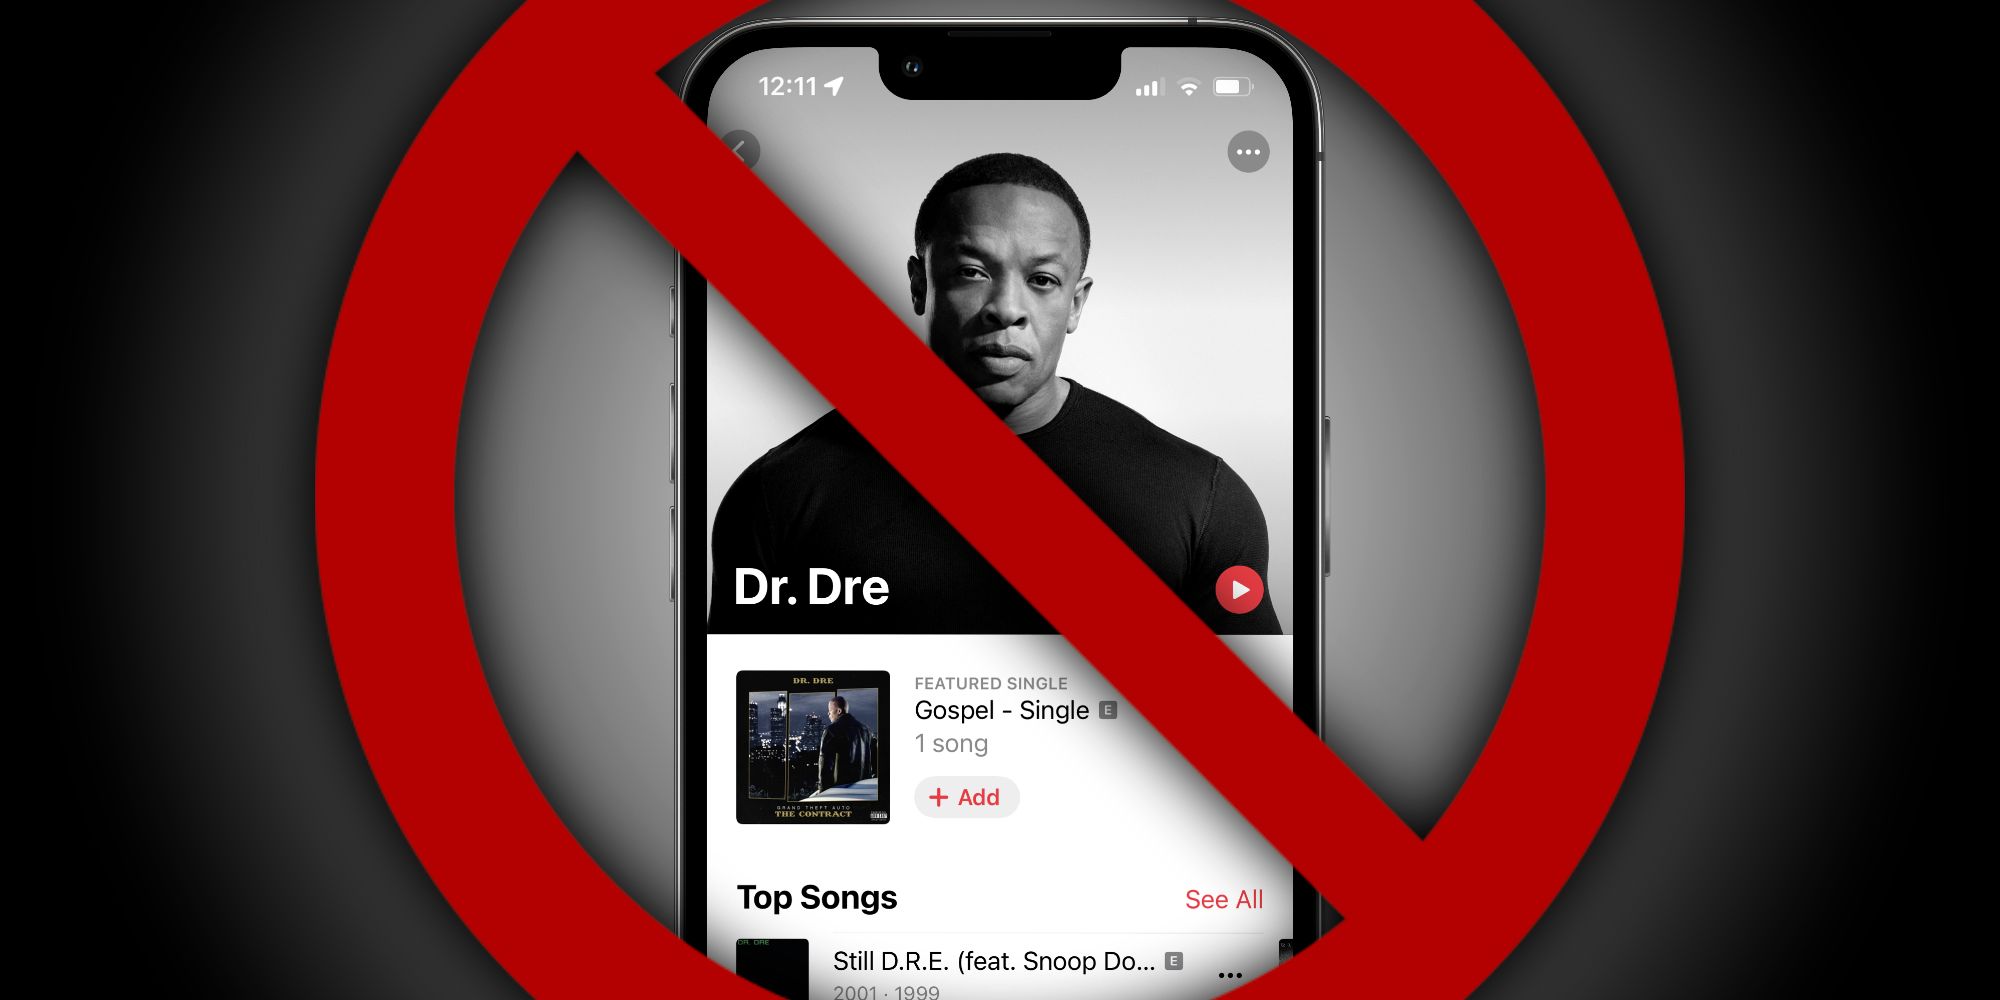 Dr. Dre artist page on the Apple Music app